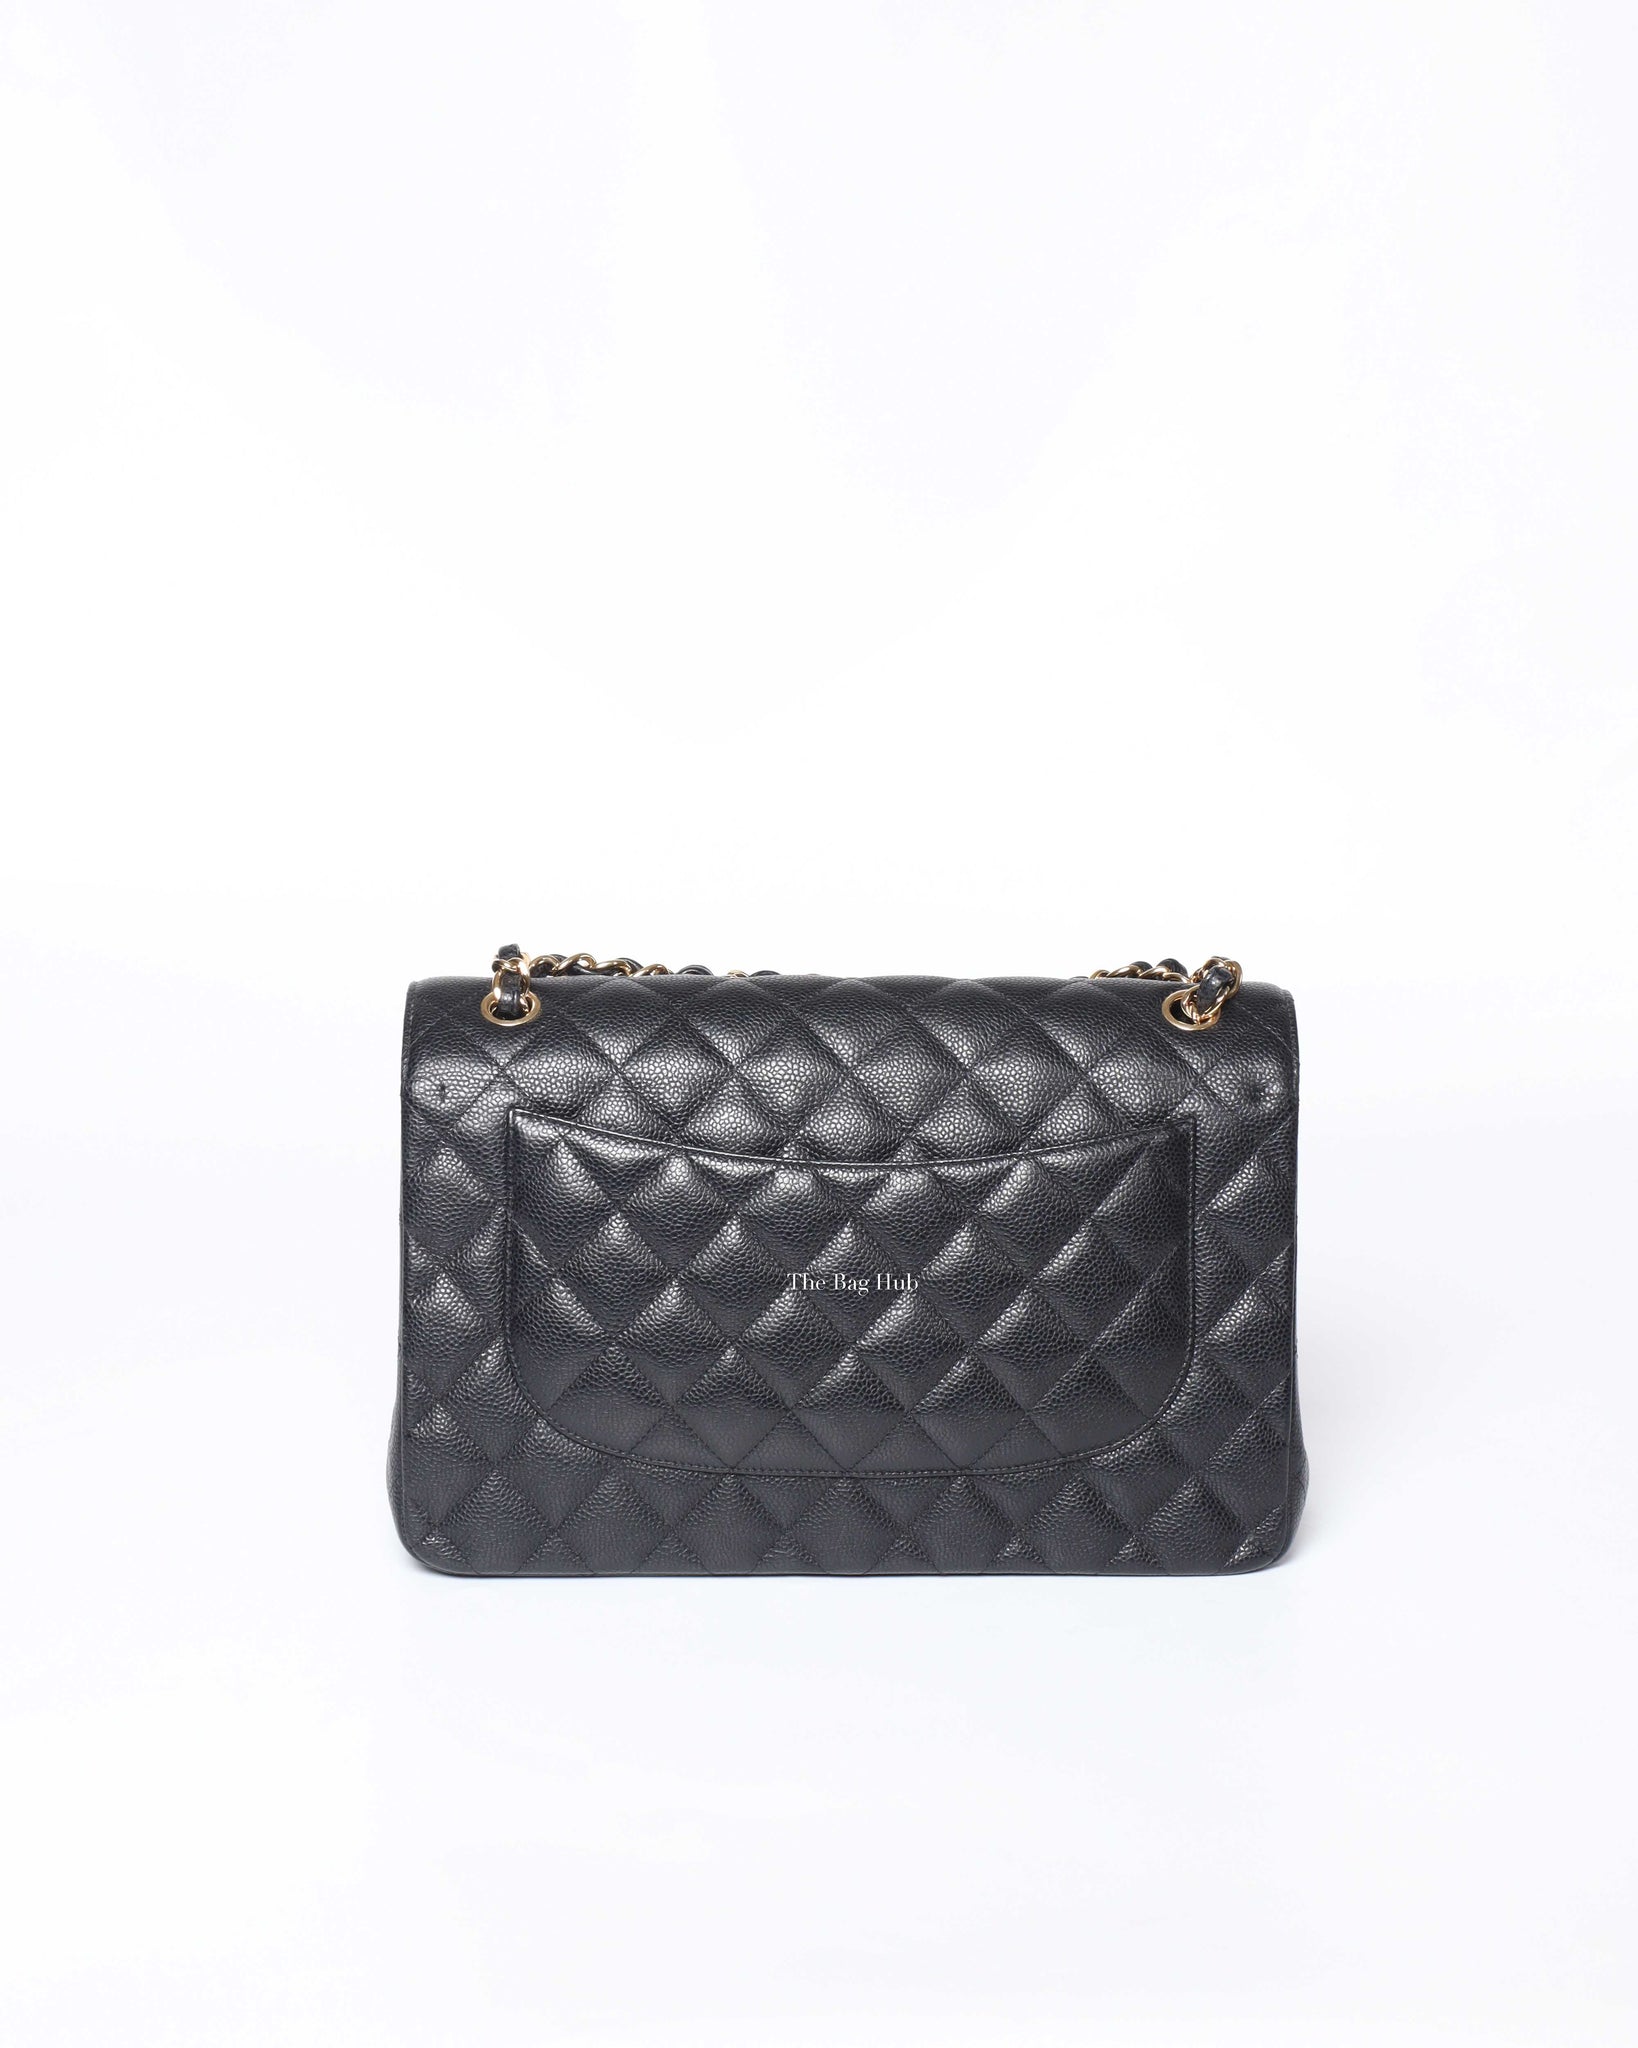 Chanel Black Quilted Caviar Leather Jumbo Classic Double Flap Bag, Designer Brand, Authentic Chanel